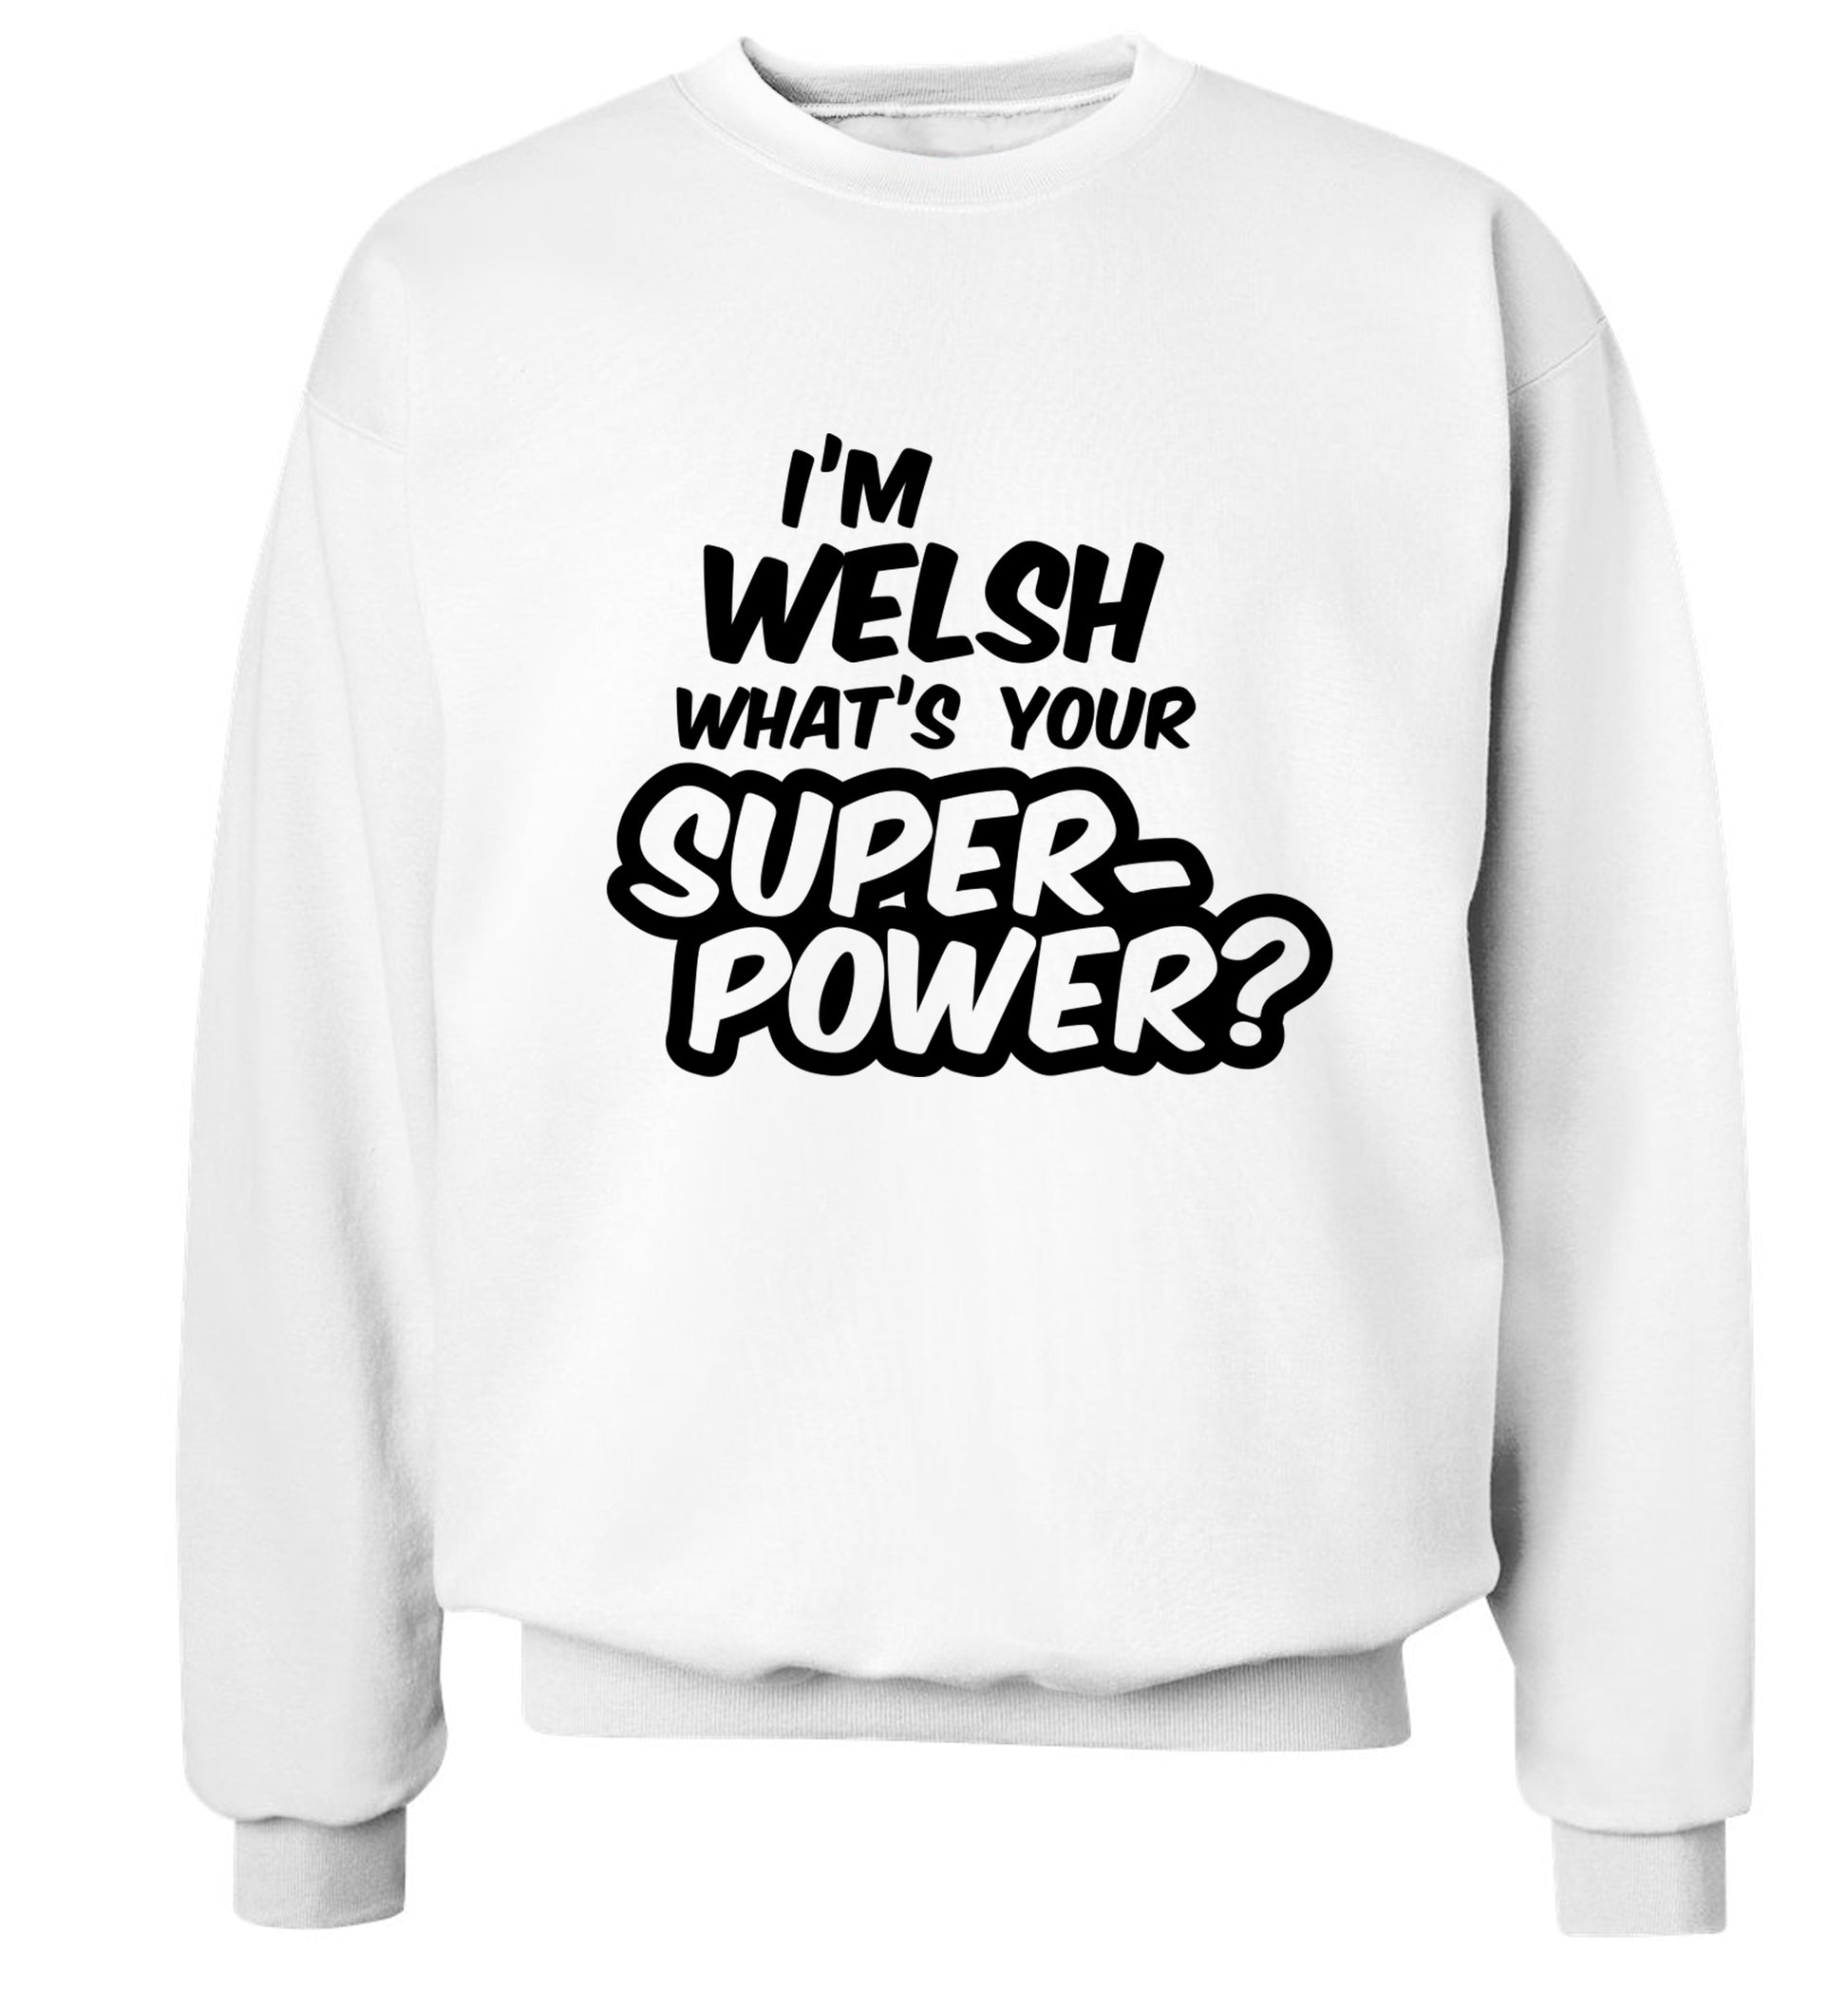 I'm Welsh what's your superpower? Adult's unisex white Sweater 2XL